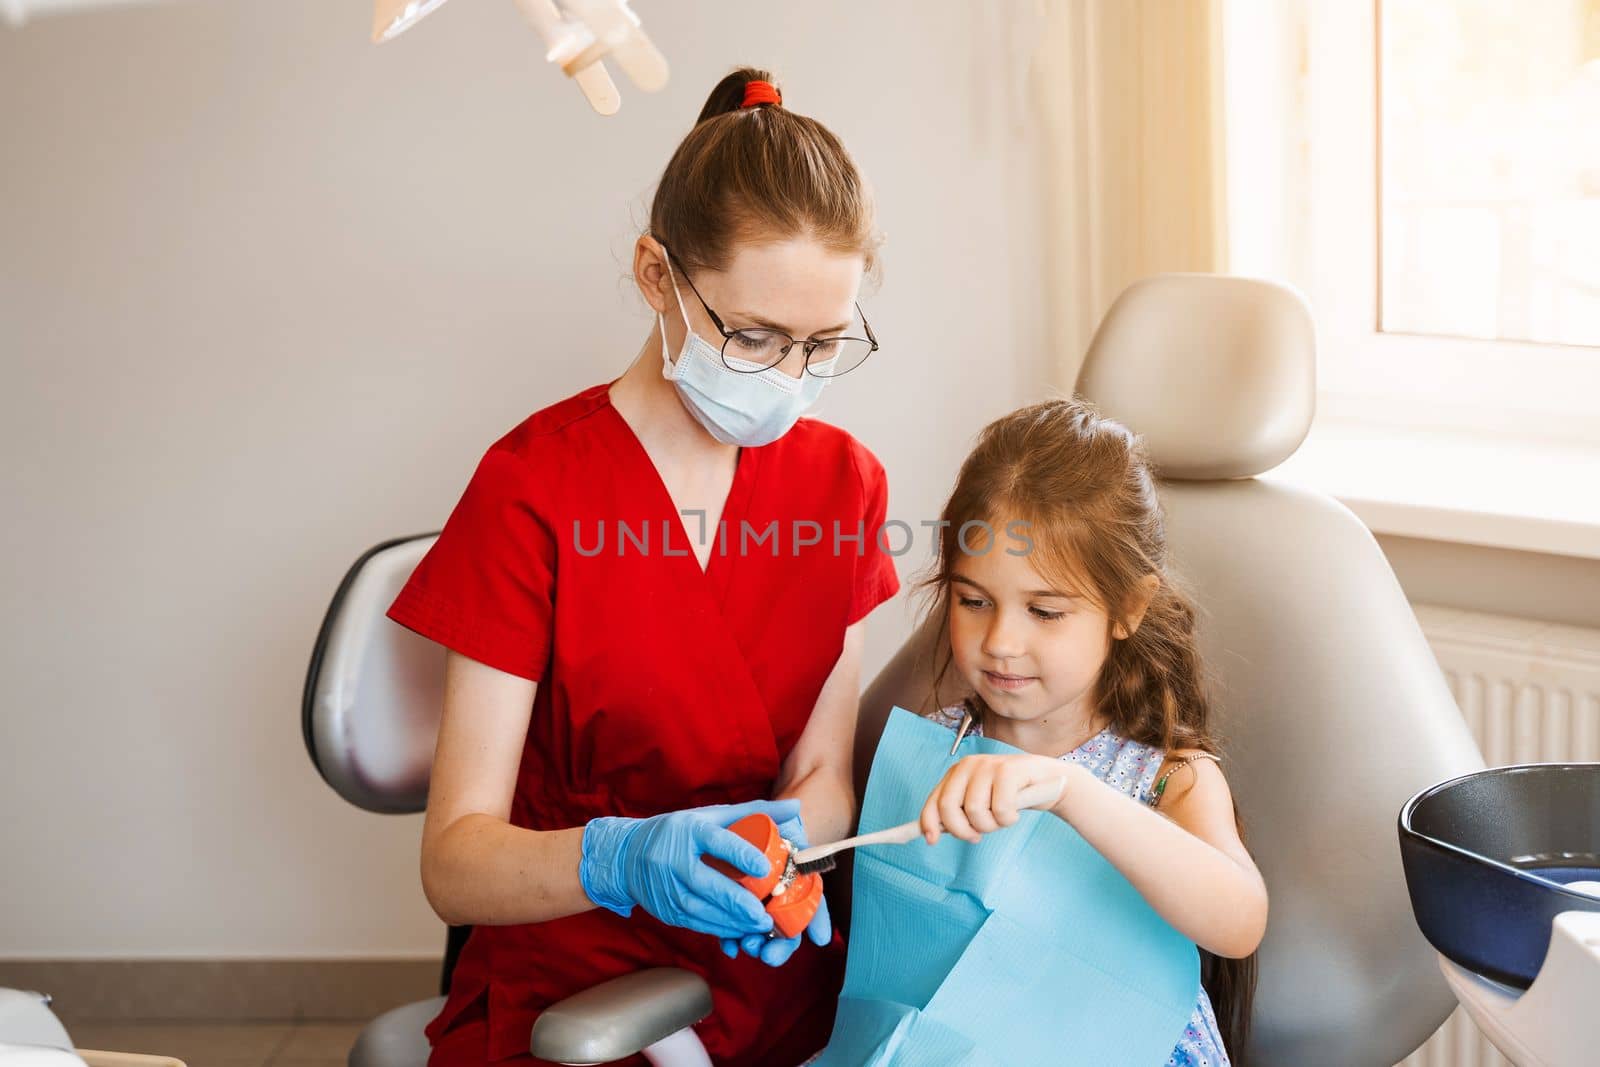 Dentist shows child how to properly use toothbrush for brush teeth. Jaw anatomical model teeth brushing. Pediatric dentist teaching oral hygiene lesson for kids in dentistry. by Rabizo